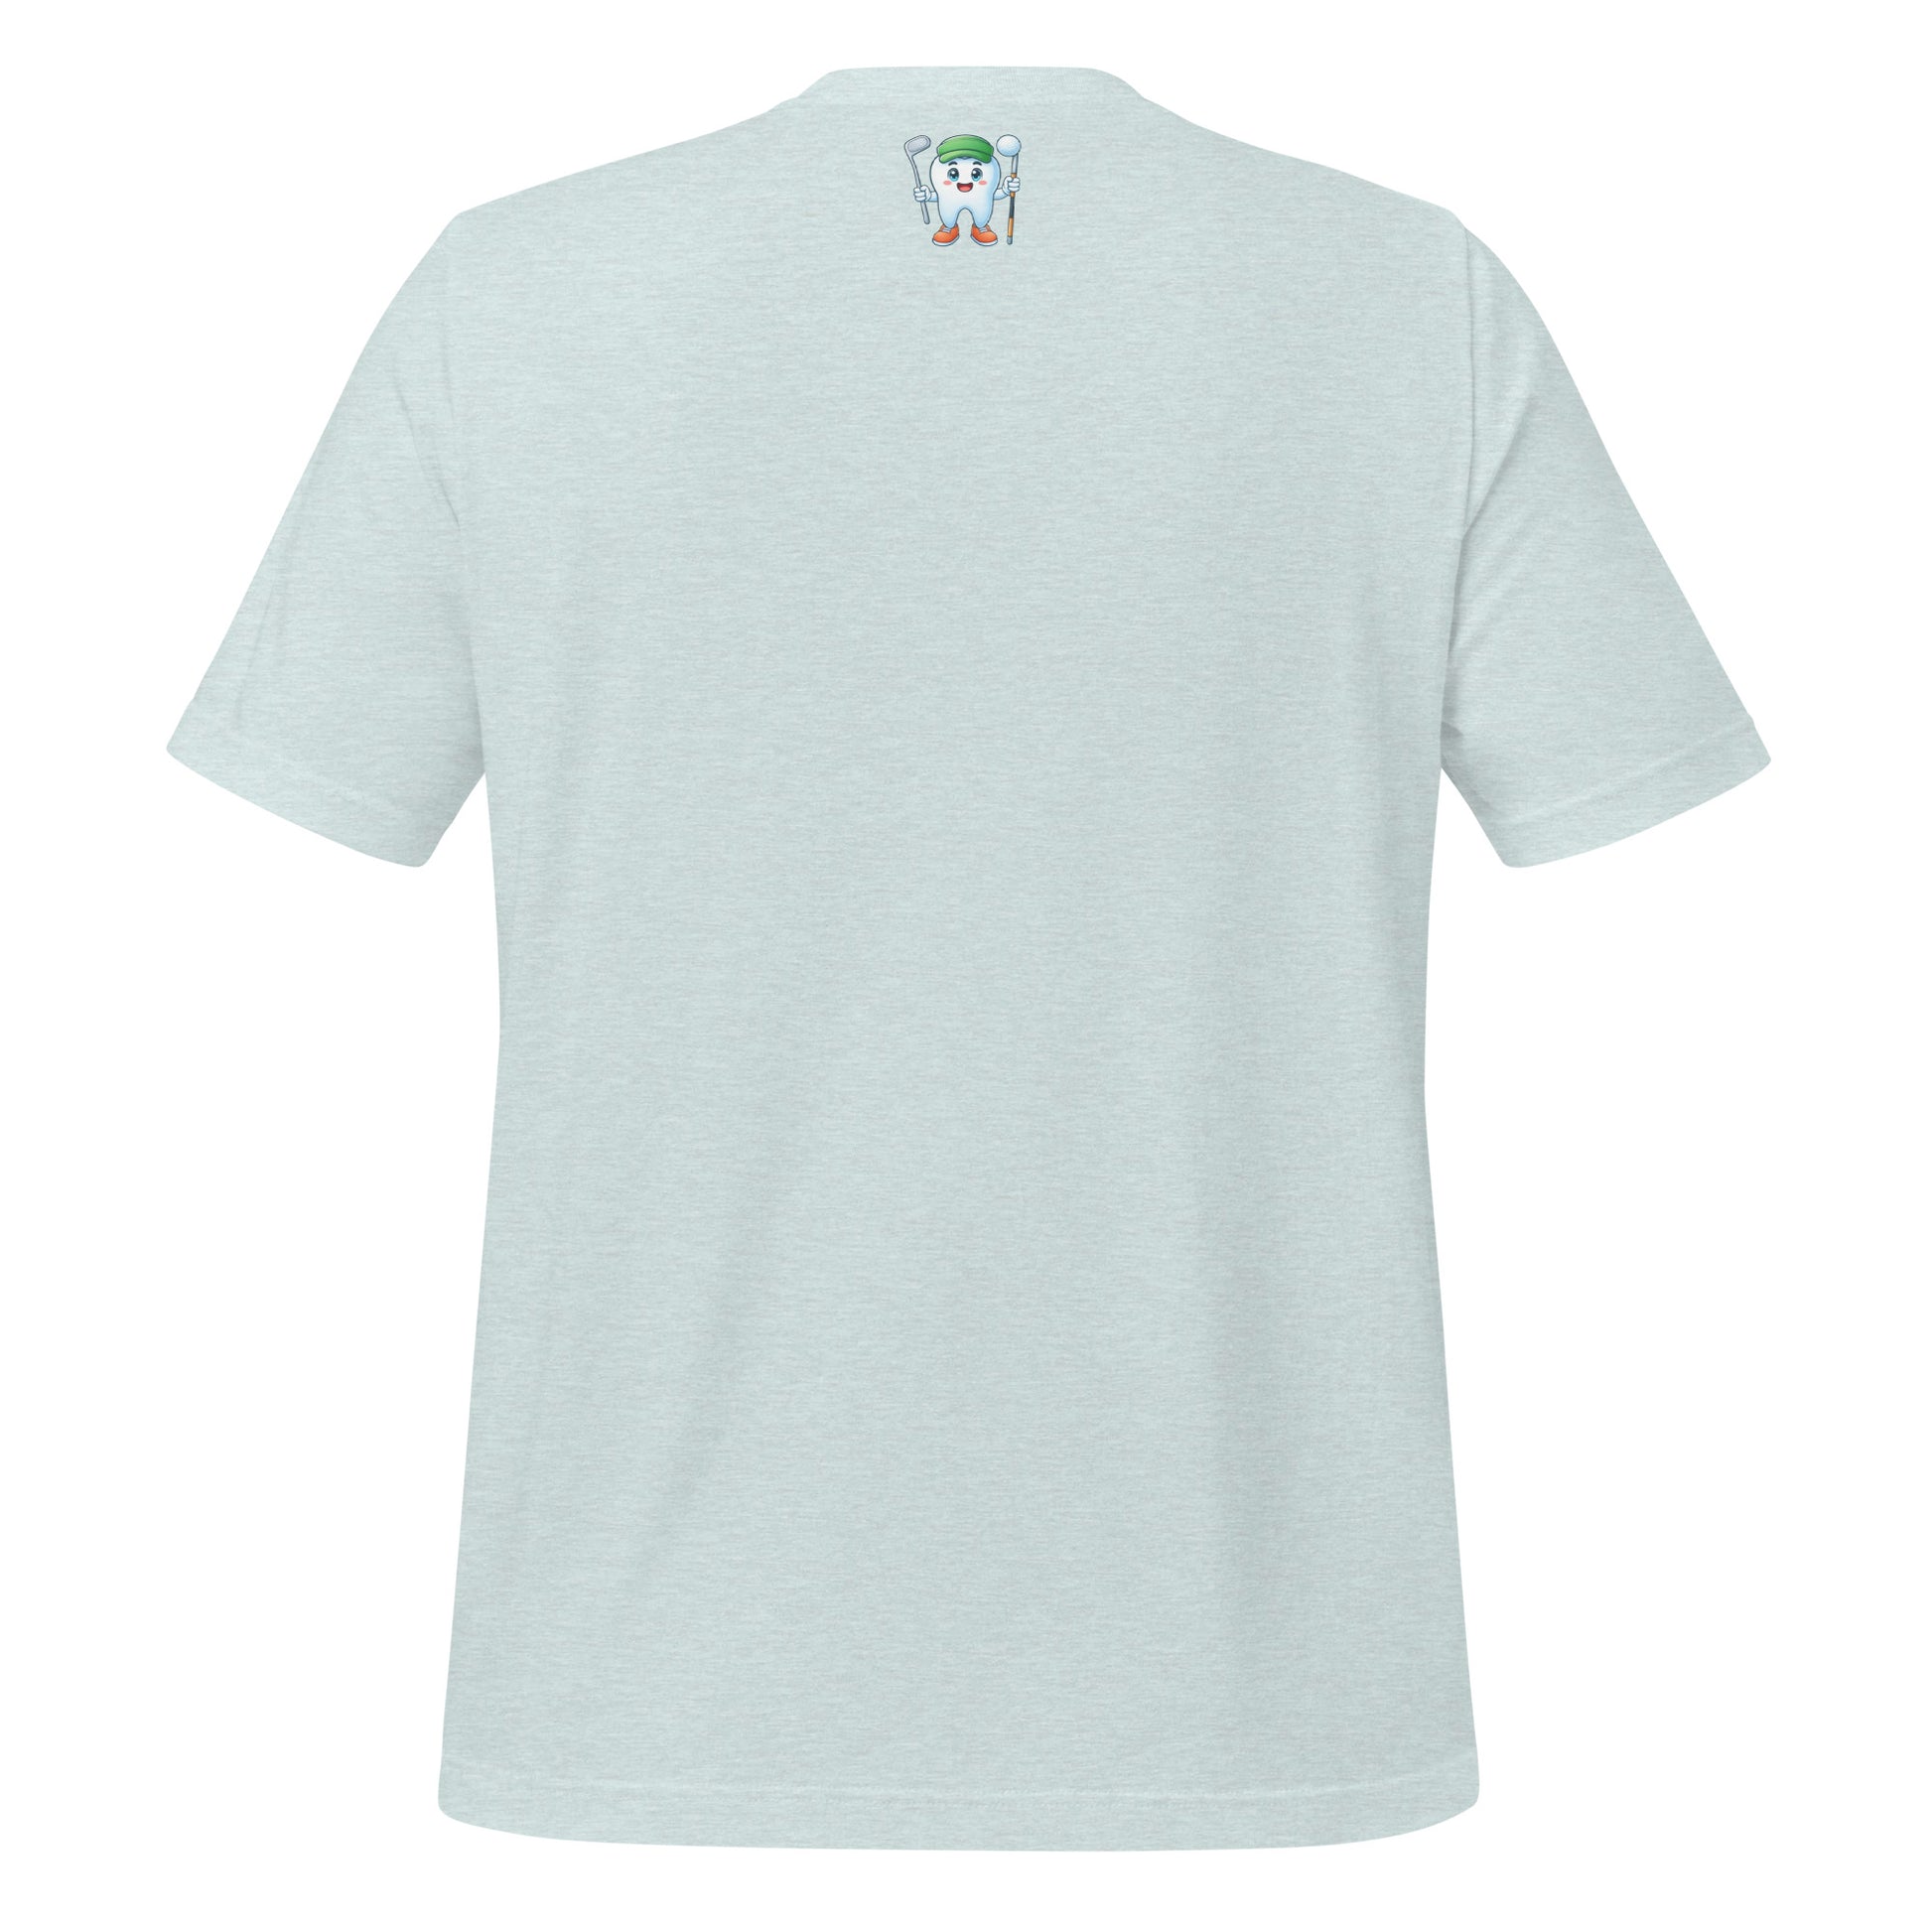 Cute dentist t-shirt showcasing an adorable tooth character in golf attire, joyfully celebrating a ‘hole in one’ achievement, perfect for dentist and dental professionals seeking unique and thematic dental apparel. Heather prism ice blue color, back view.